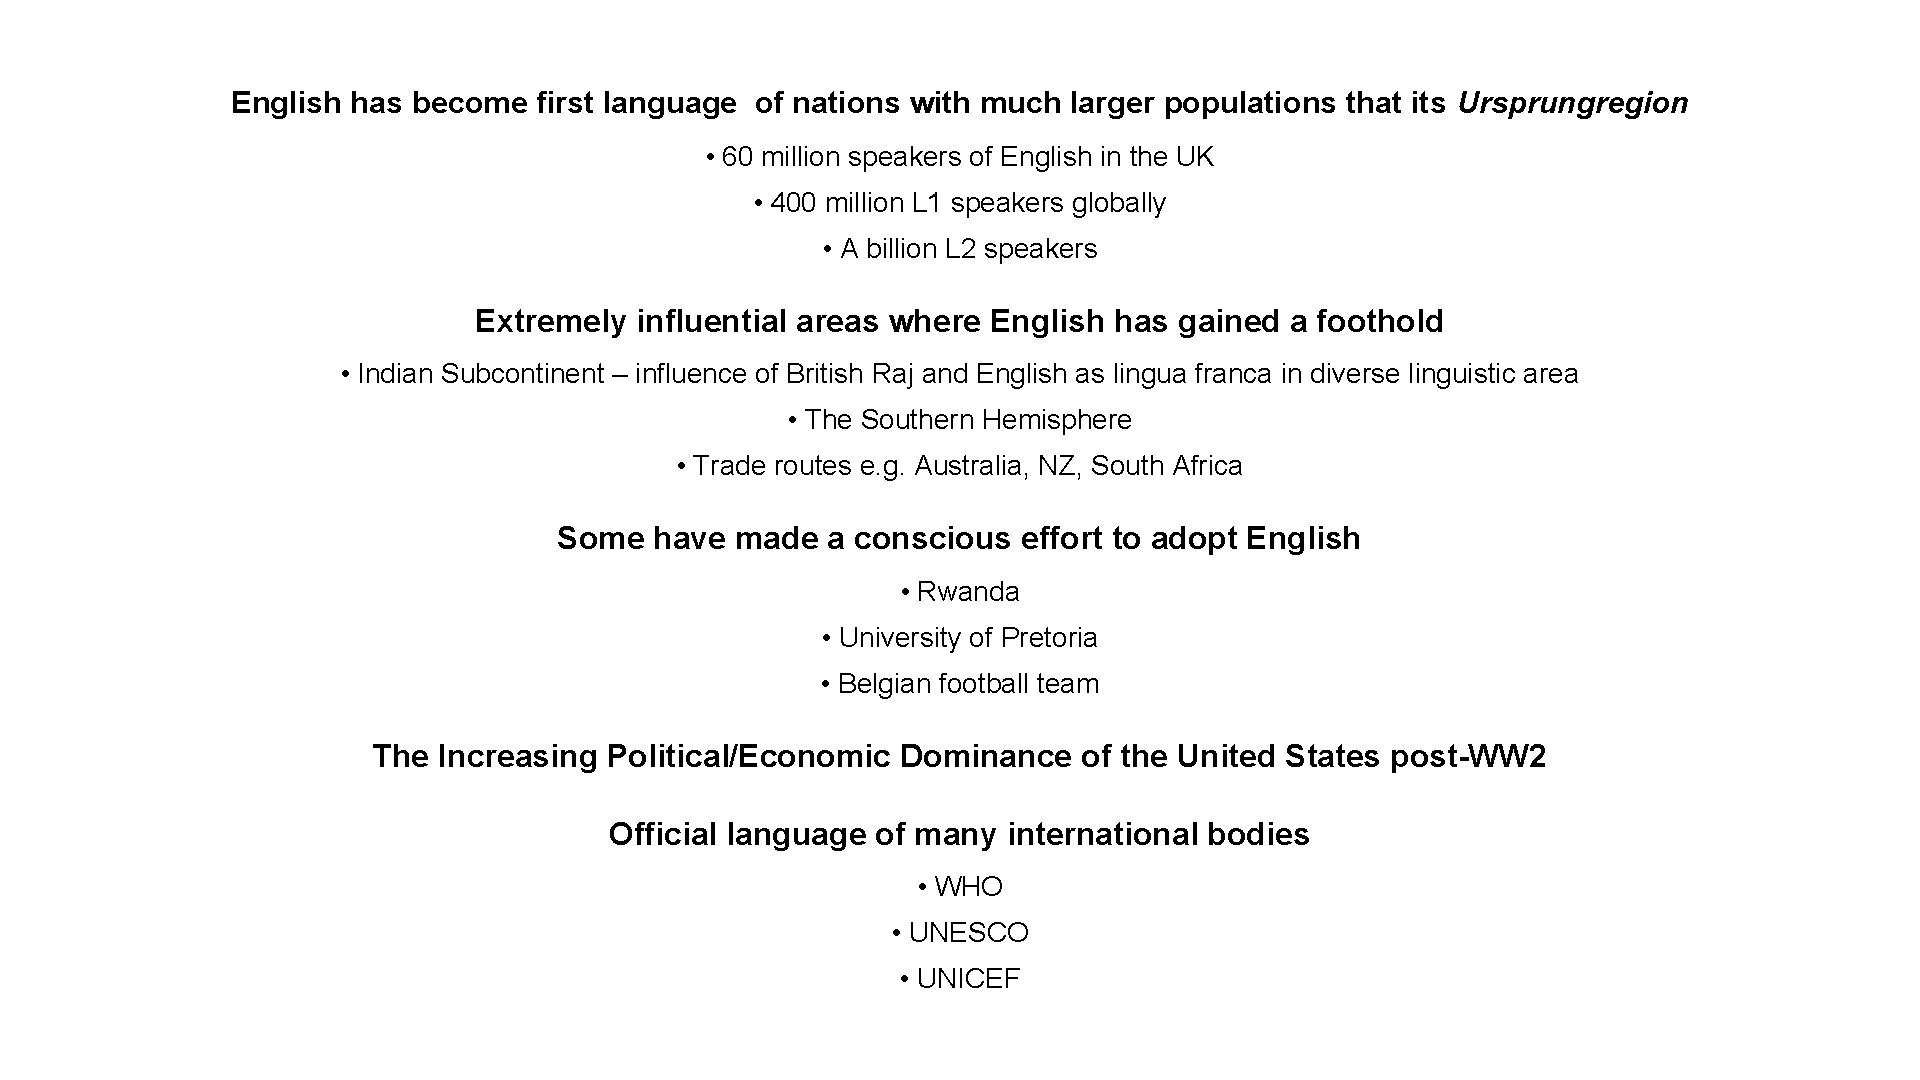 English has become first language of nations with much larger populations that its Ursprungregion